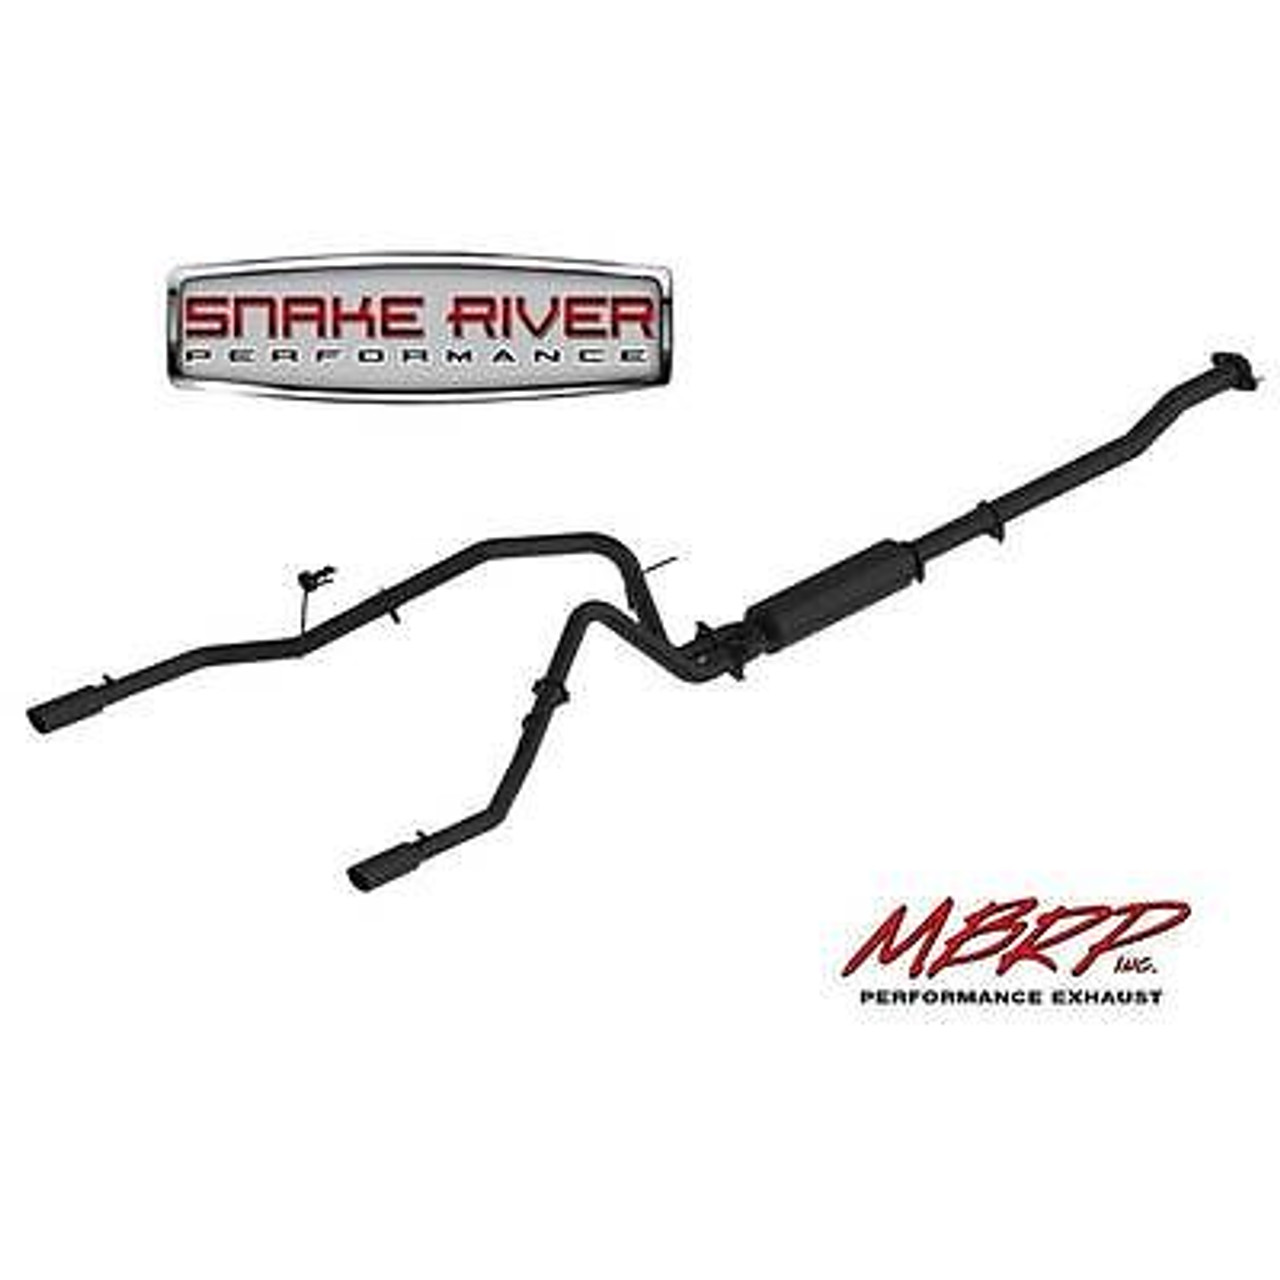 S5240BLK - MBRP 2.5" EXHAUST 2011-2014 FORD F150 3.5L V6 ECOBOOST DUAL ALUMINIZED BLACK